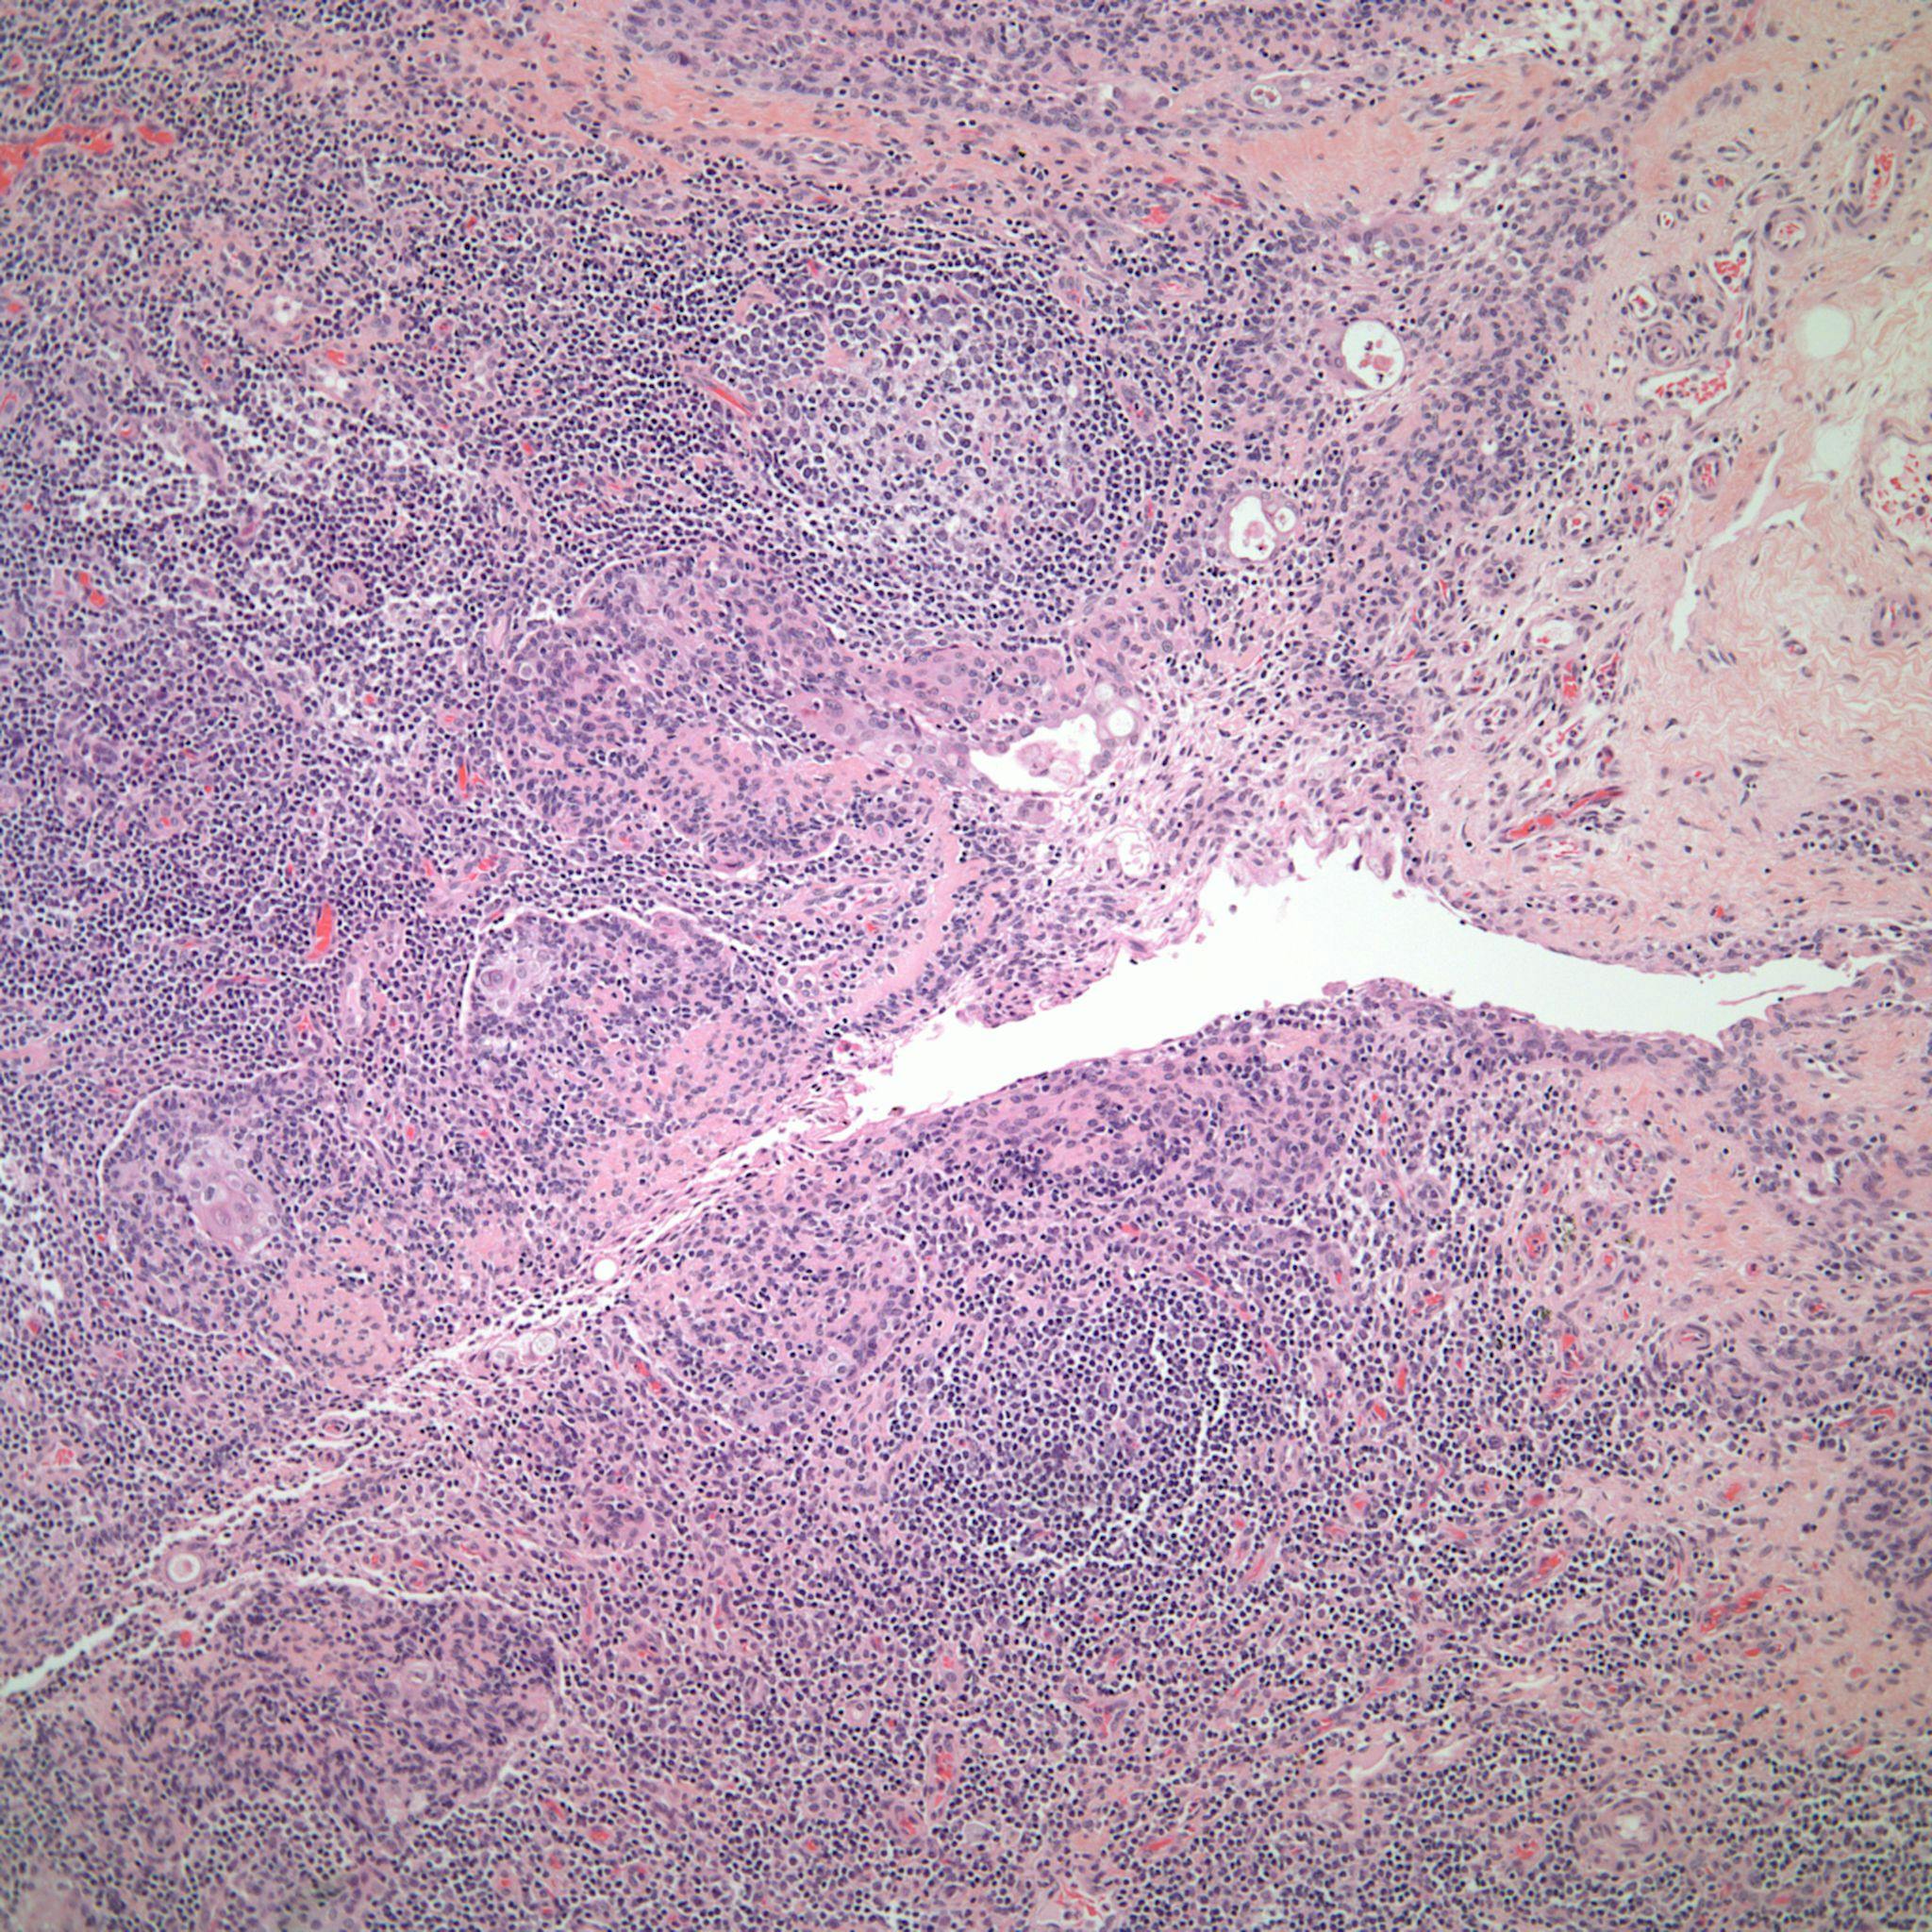 A 35-Year-Old Woman with Dyspnea